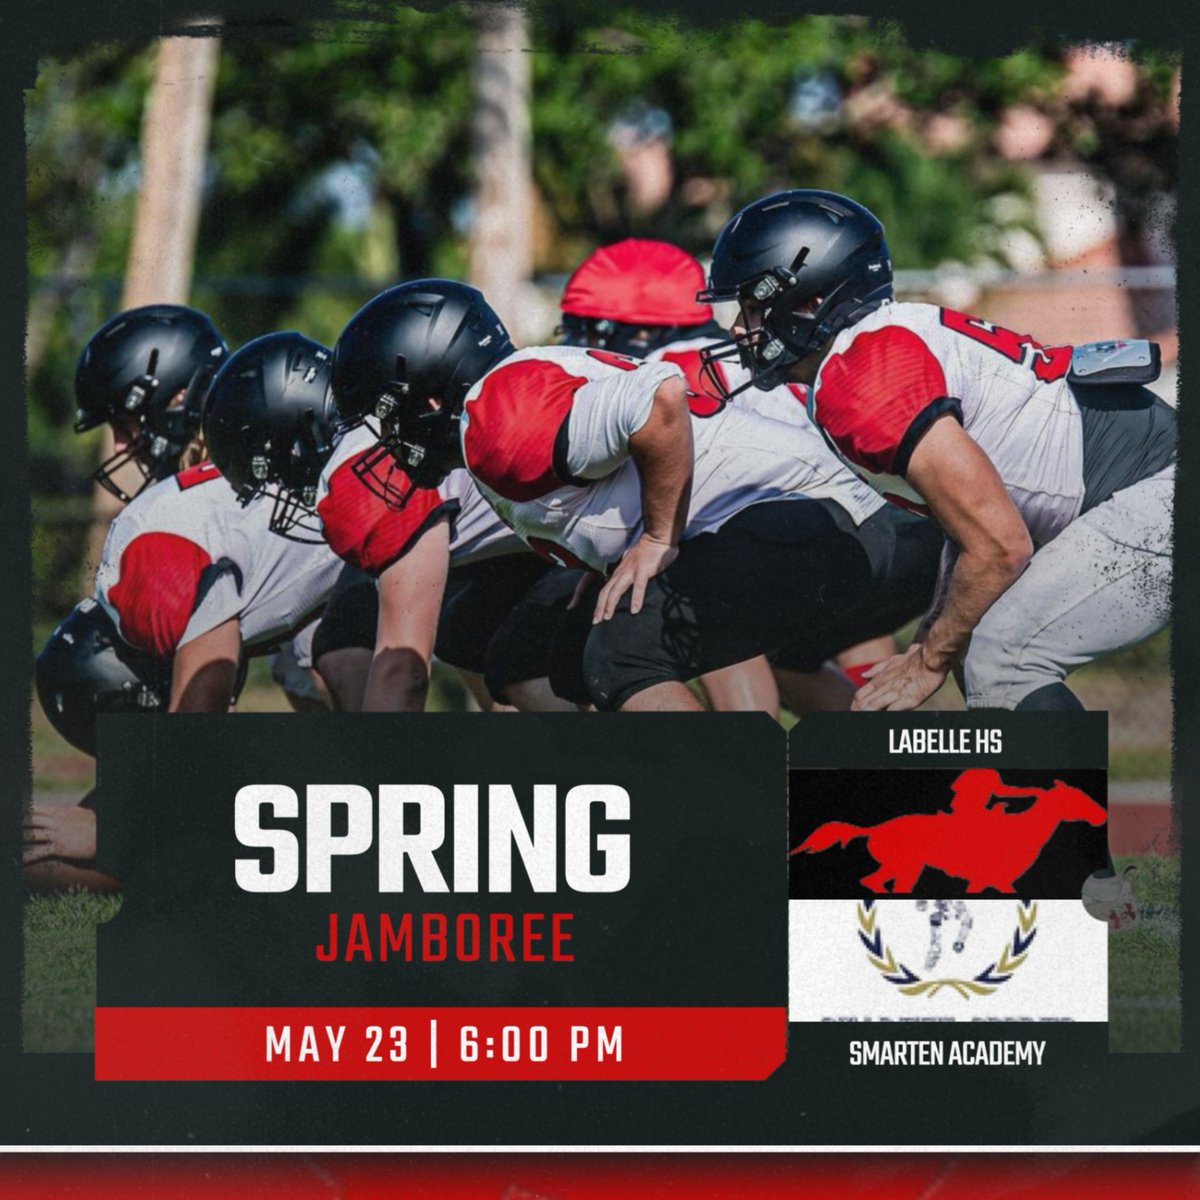 Come out this Thursday for Cooper City High School's Spring Jamboree. The Cowboys will be taking on Labelle High School and SmartEn Academy, 6pm kickoff. Go Cowboys! @Principal_CCHS @CooperCityHigh